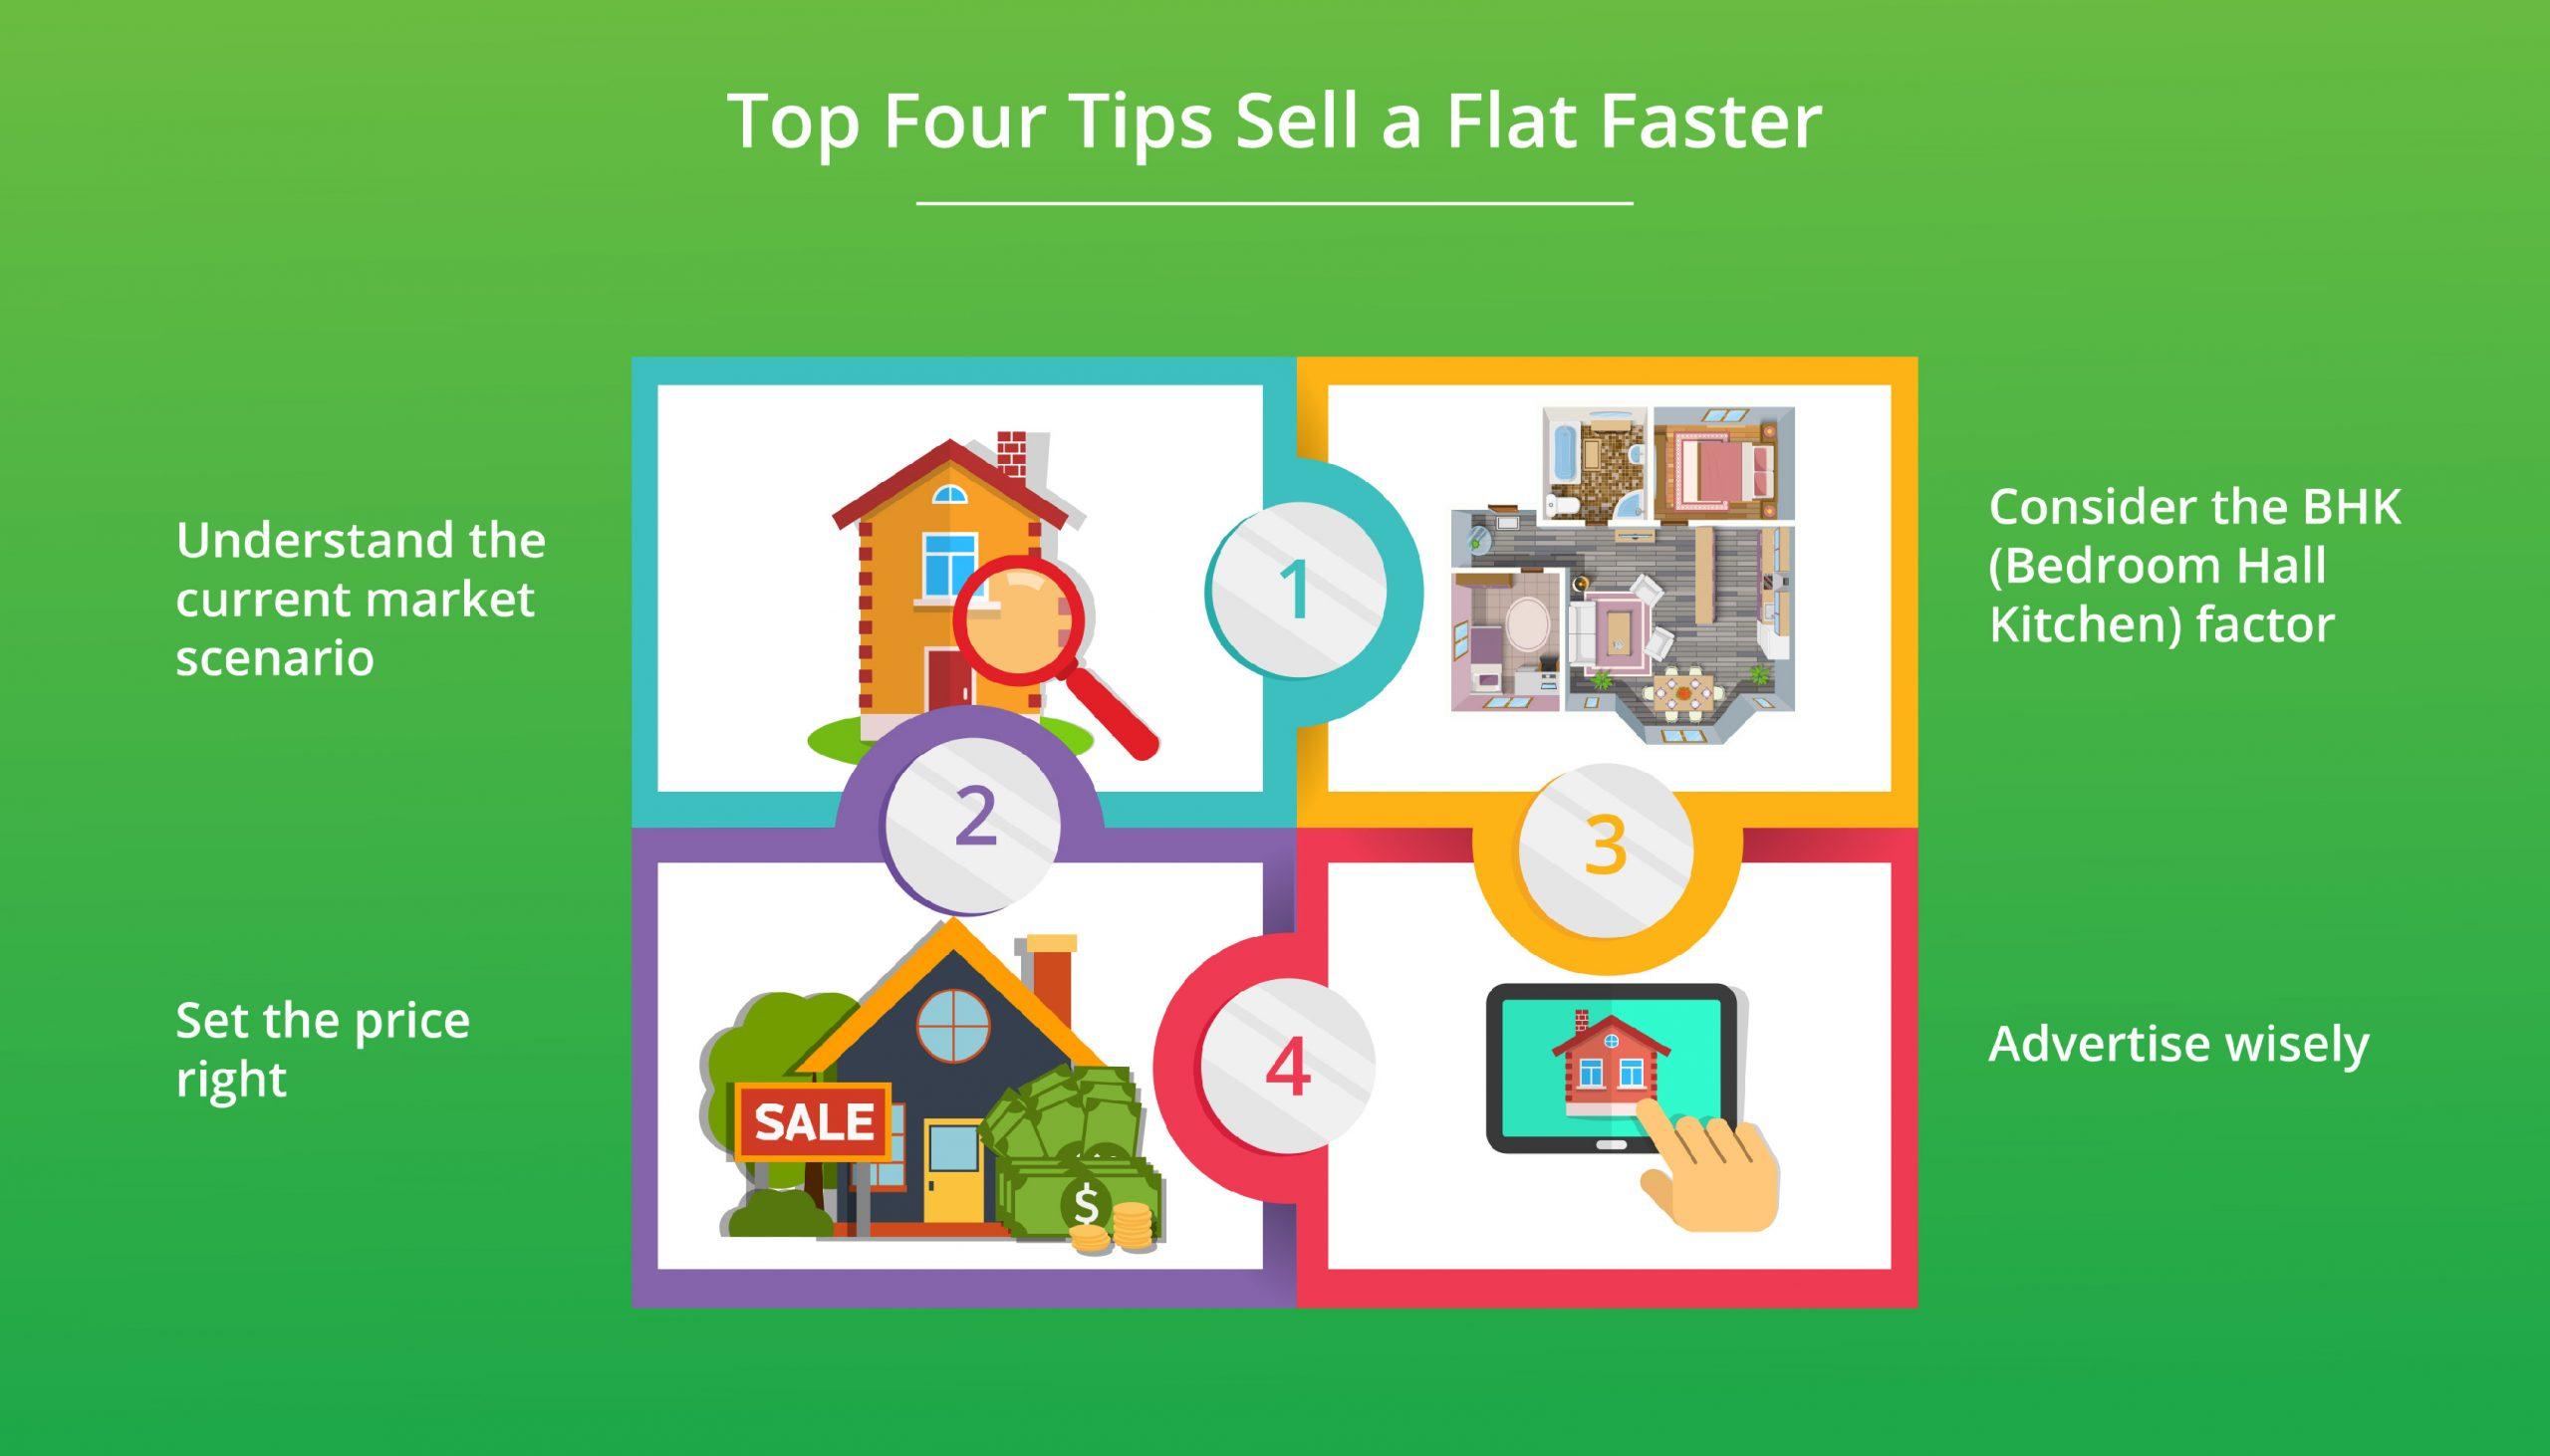 Top Four Tips Sell a Flat Faster